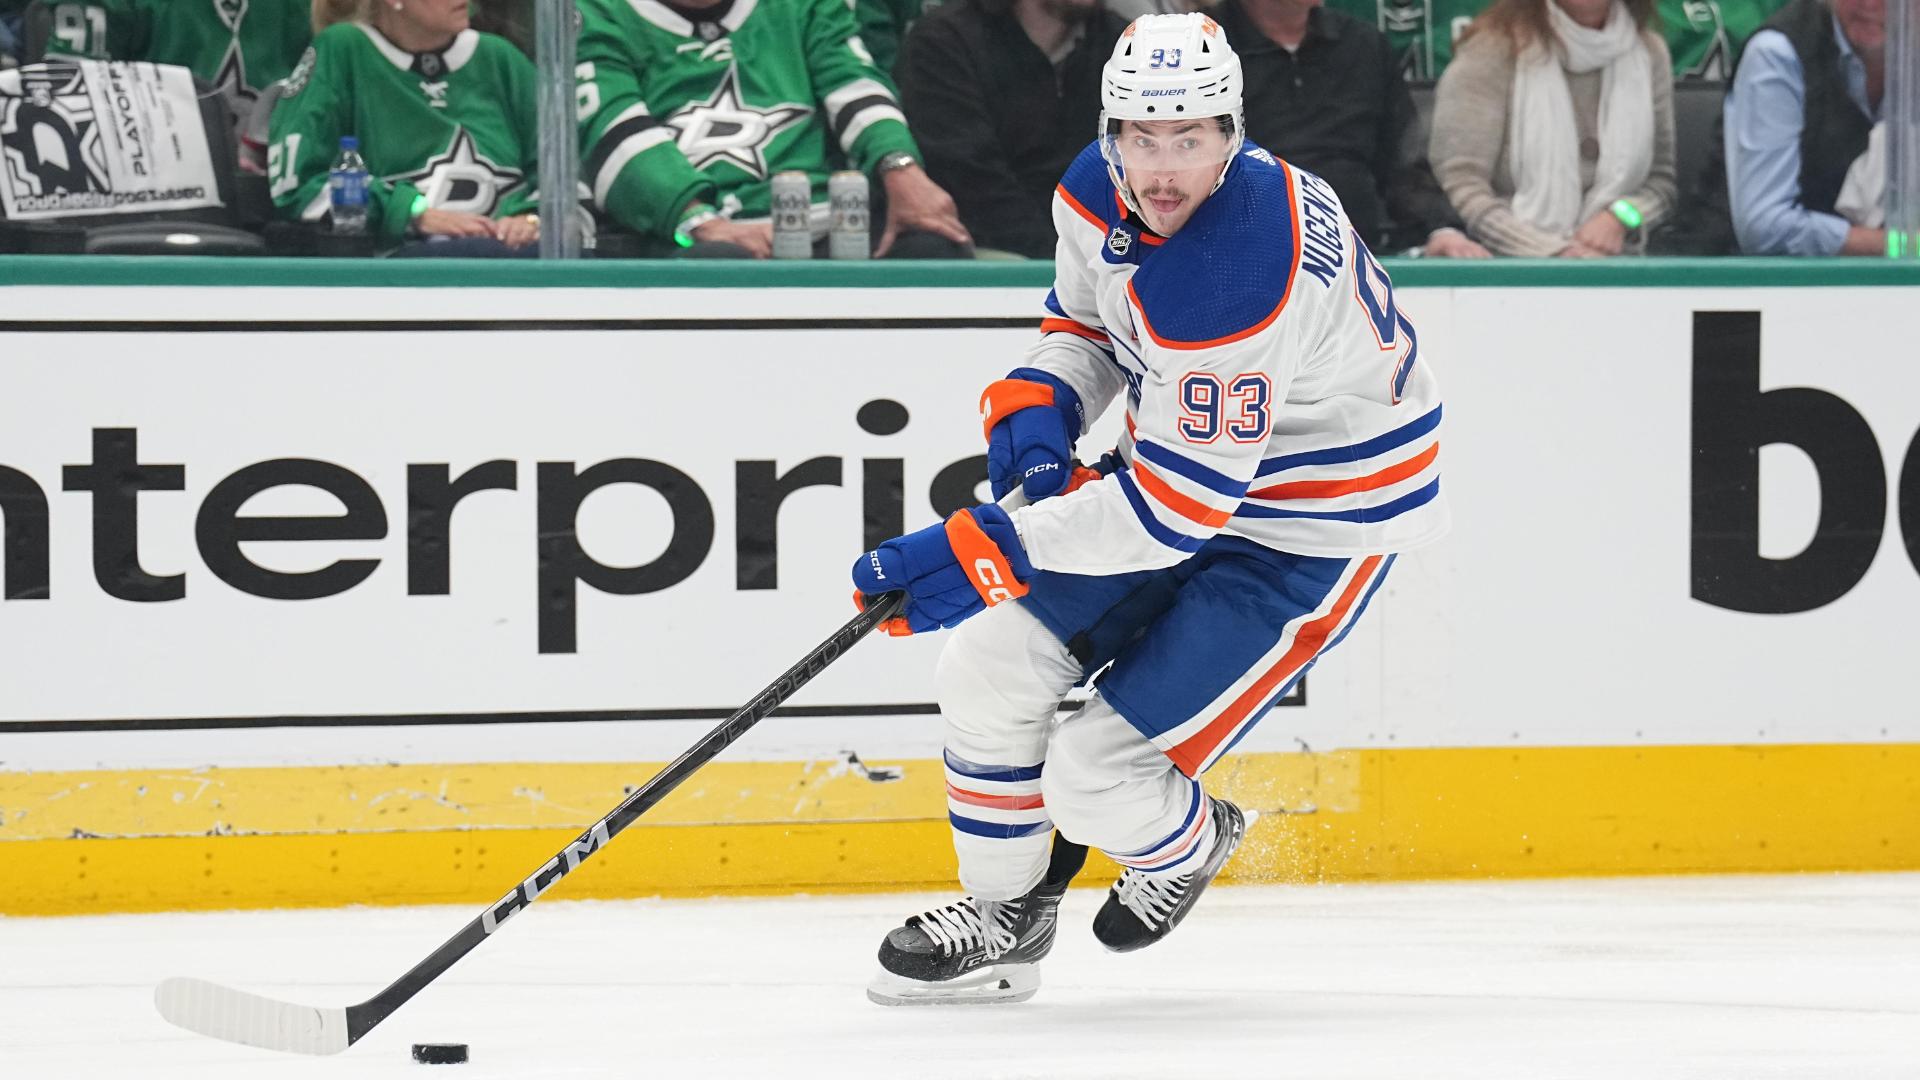 Ryan Nugent-Hopkins slaps home his 2nd goal for Oilers